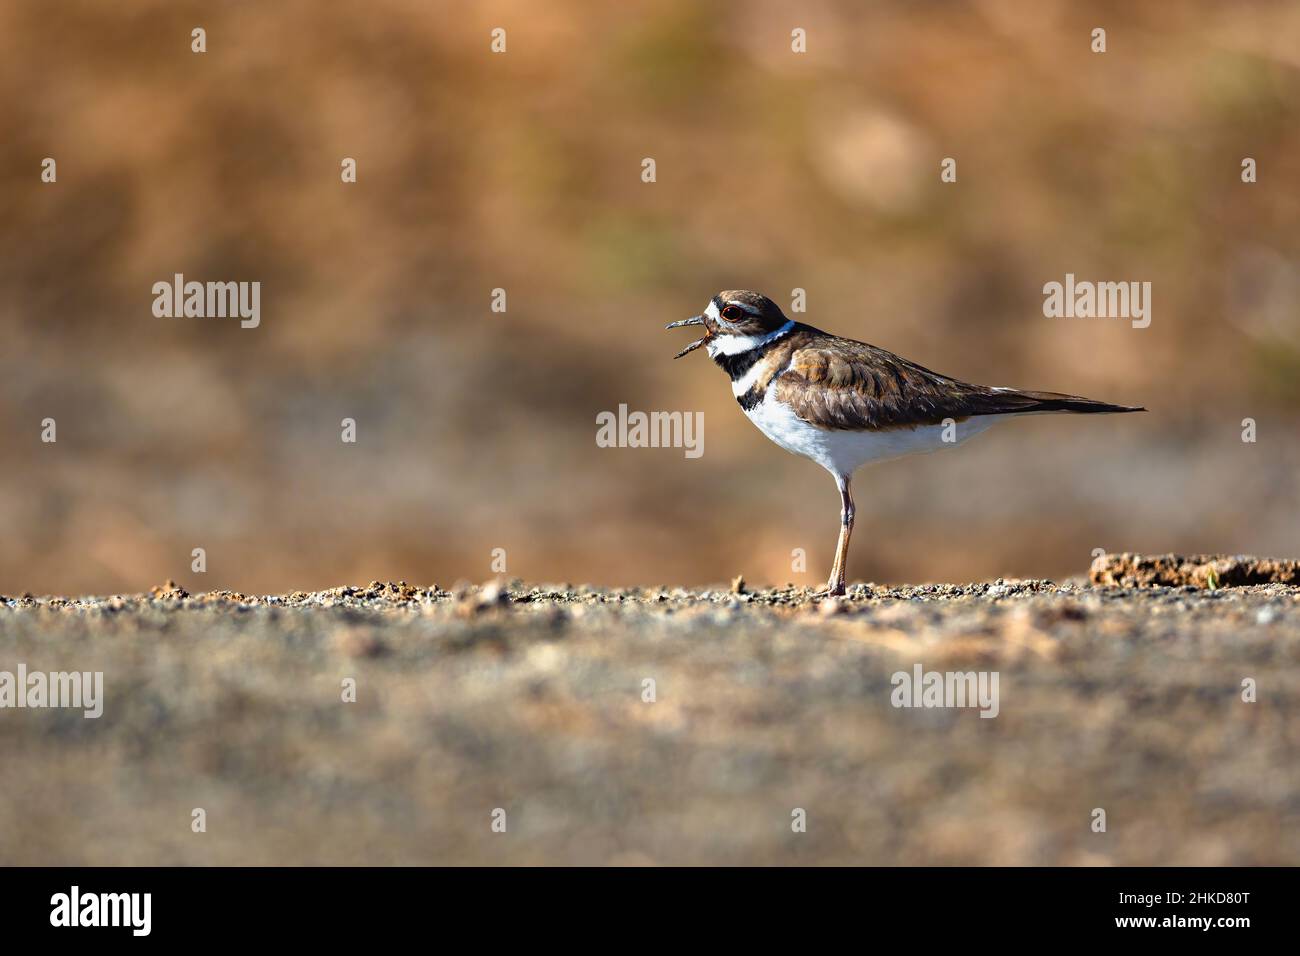 A Killdeer bird standing on flat ground, calling out loudly, with the glow of the afternoon sunlight warming the scene. Stock Photo